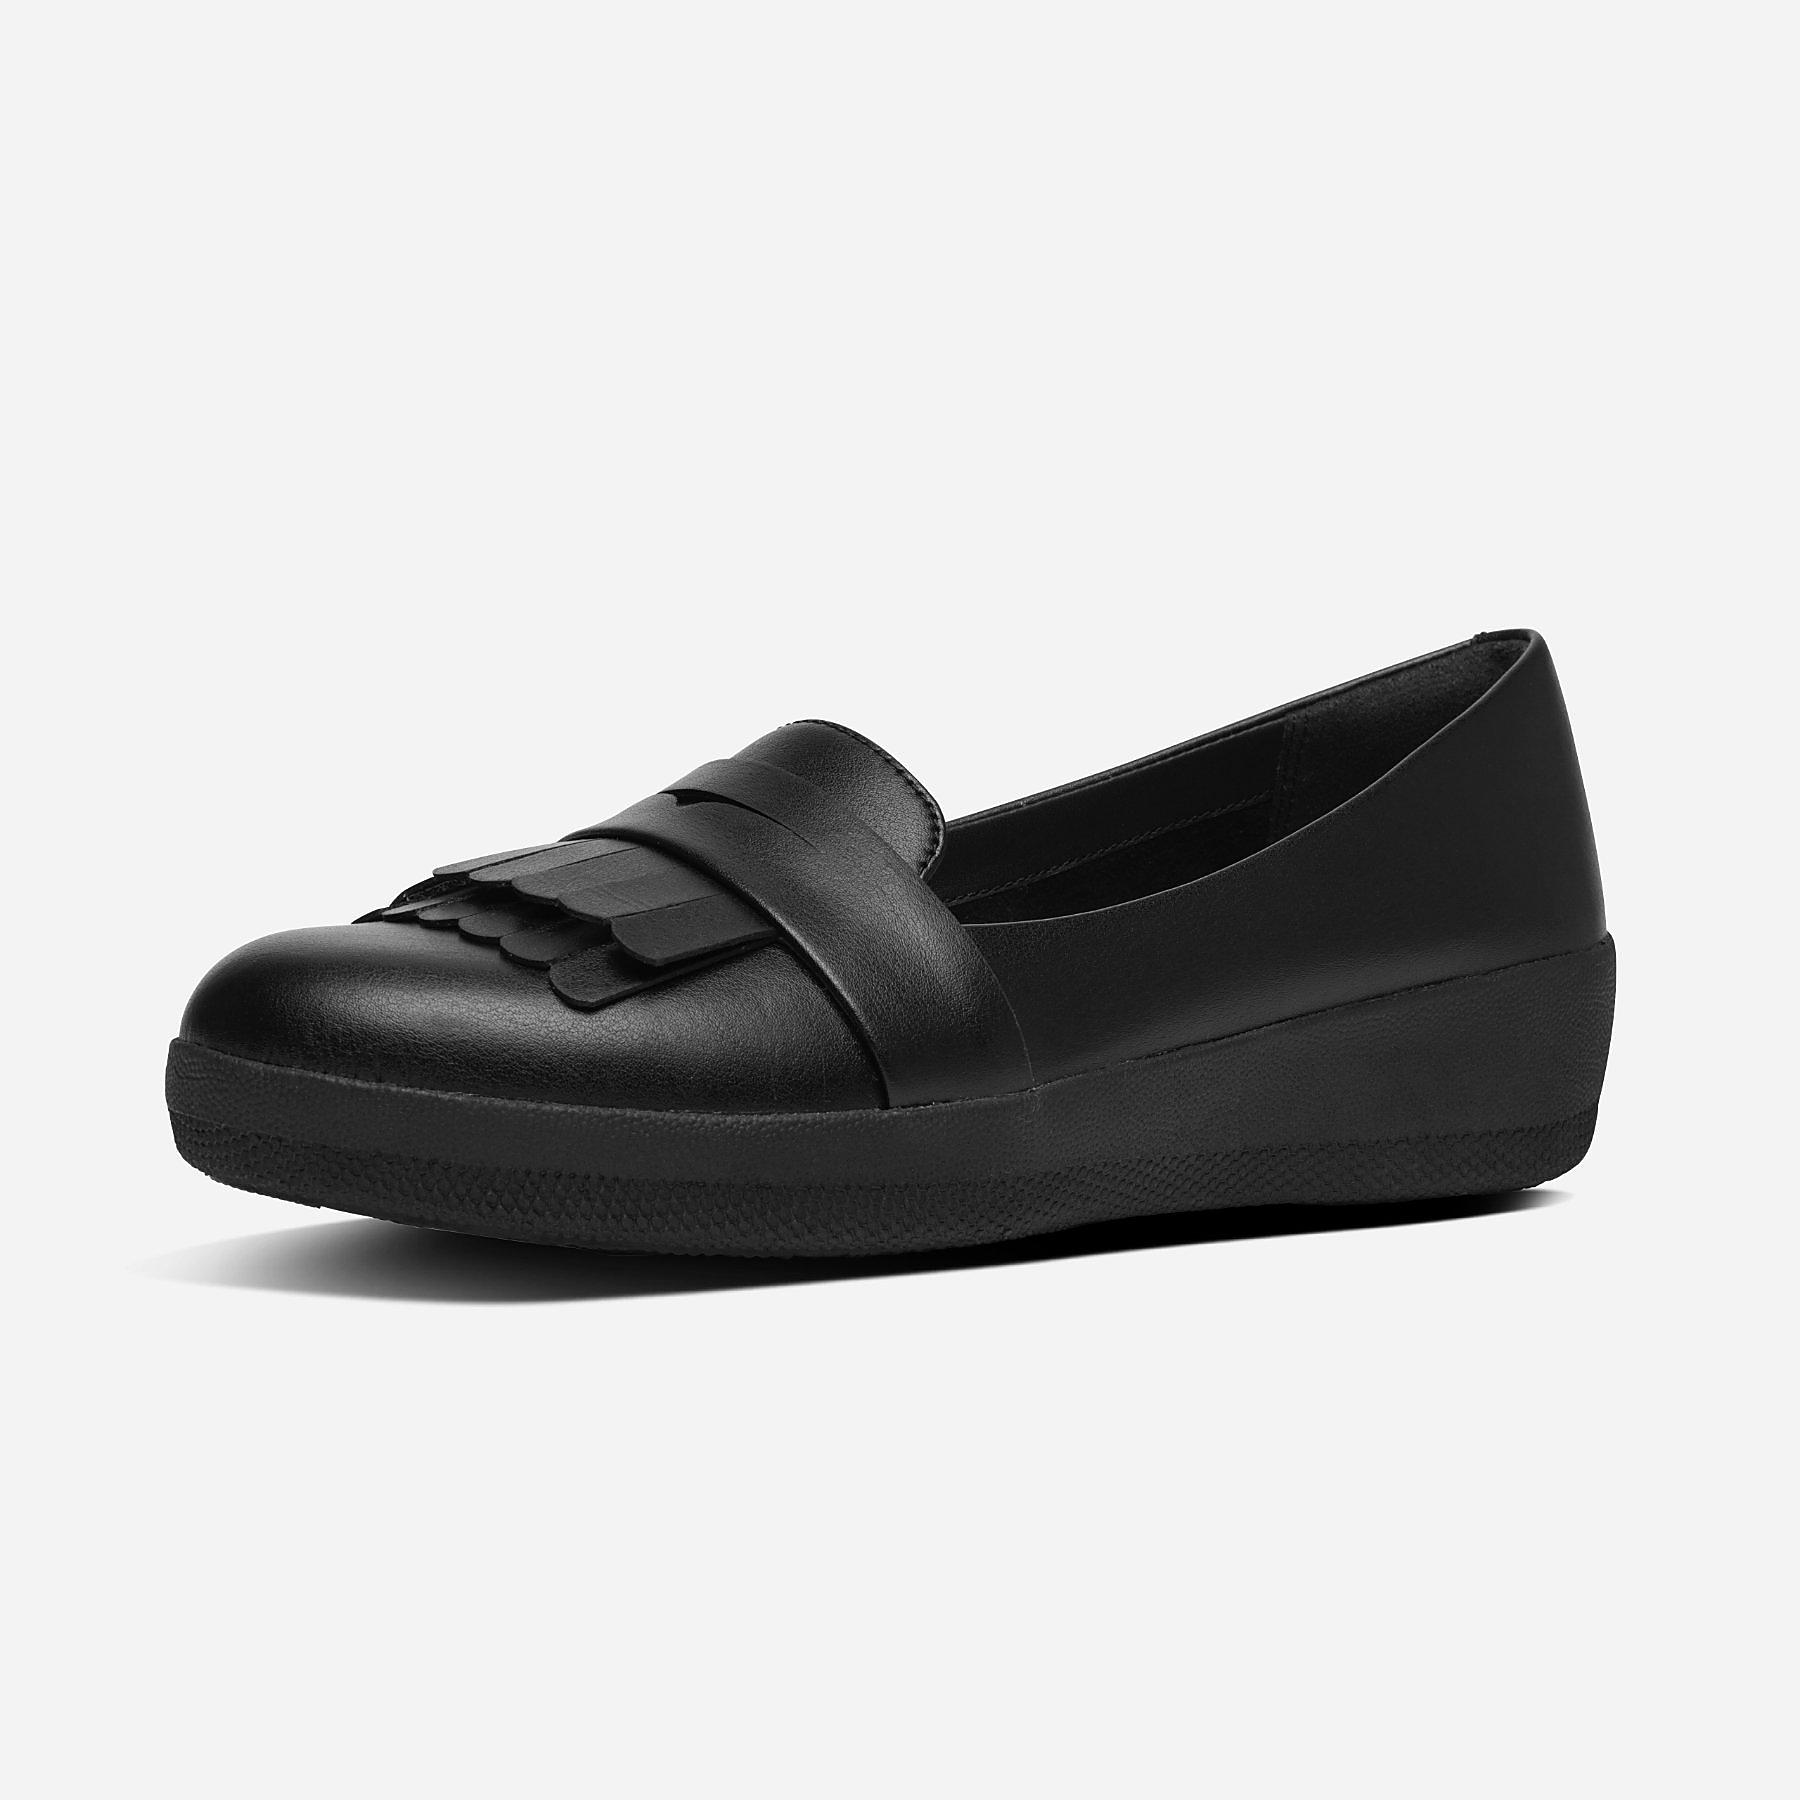 fitflop slip on shoes